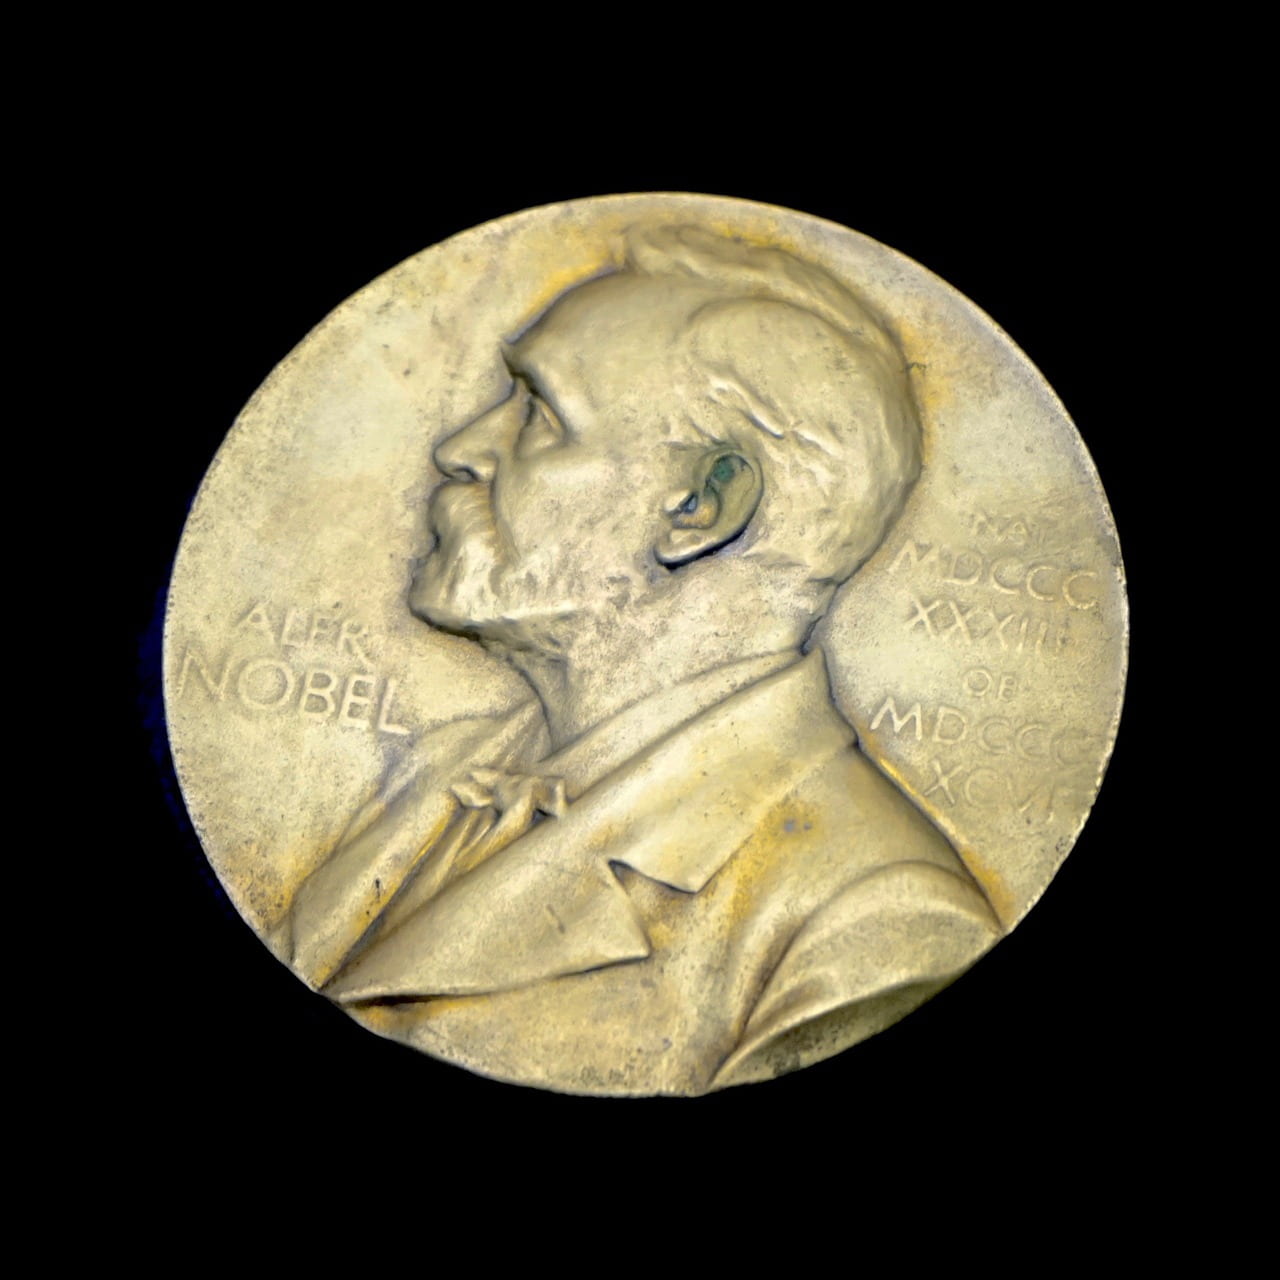 This Year’s Nobel Peace Prize Will Be Awarded On Friday – Here Are Teaching & Learning Resources